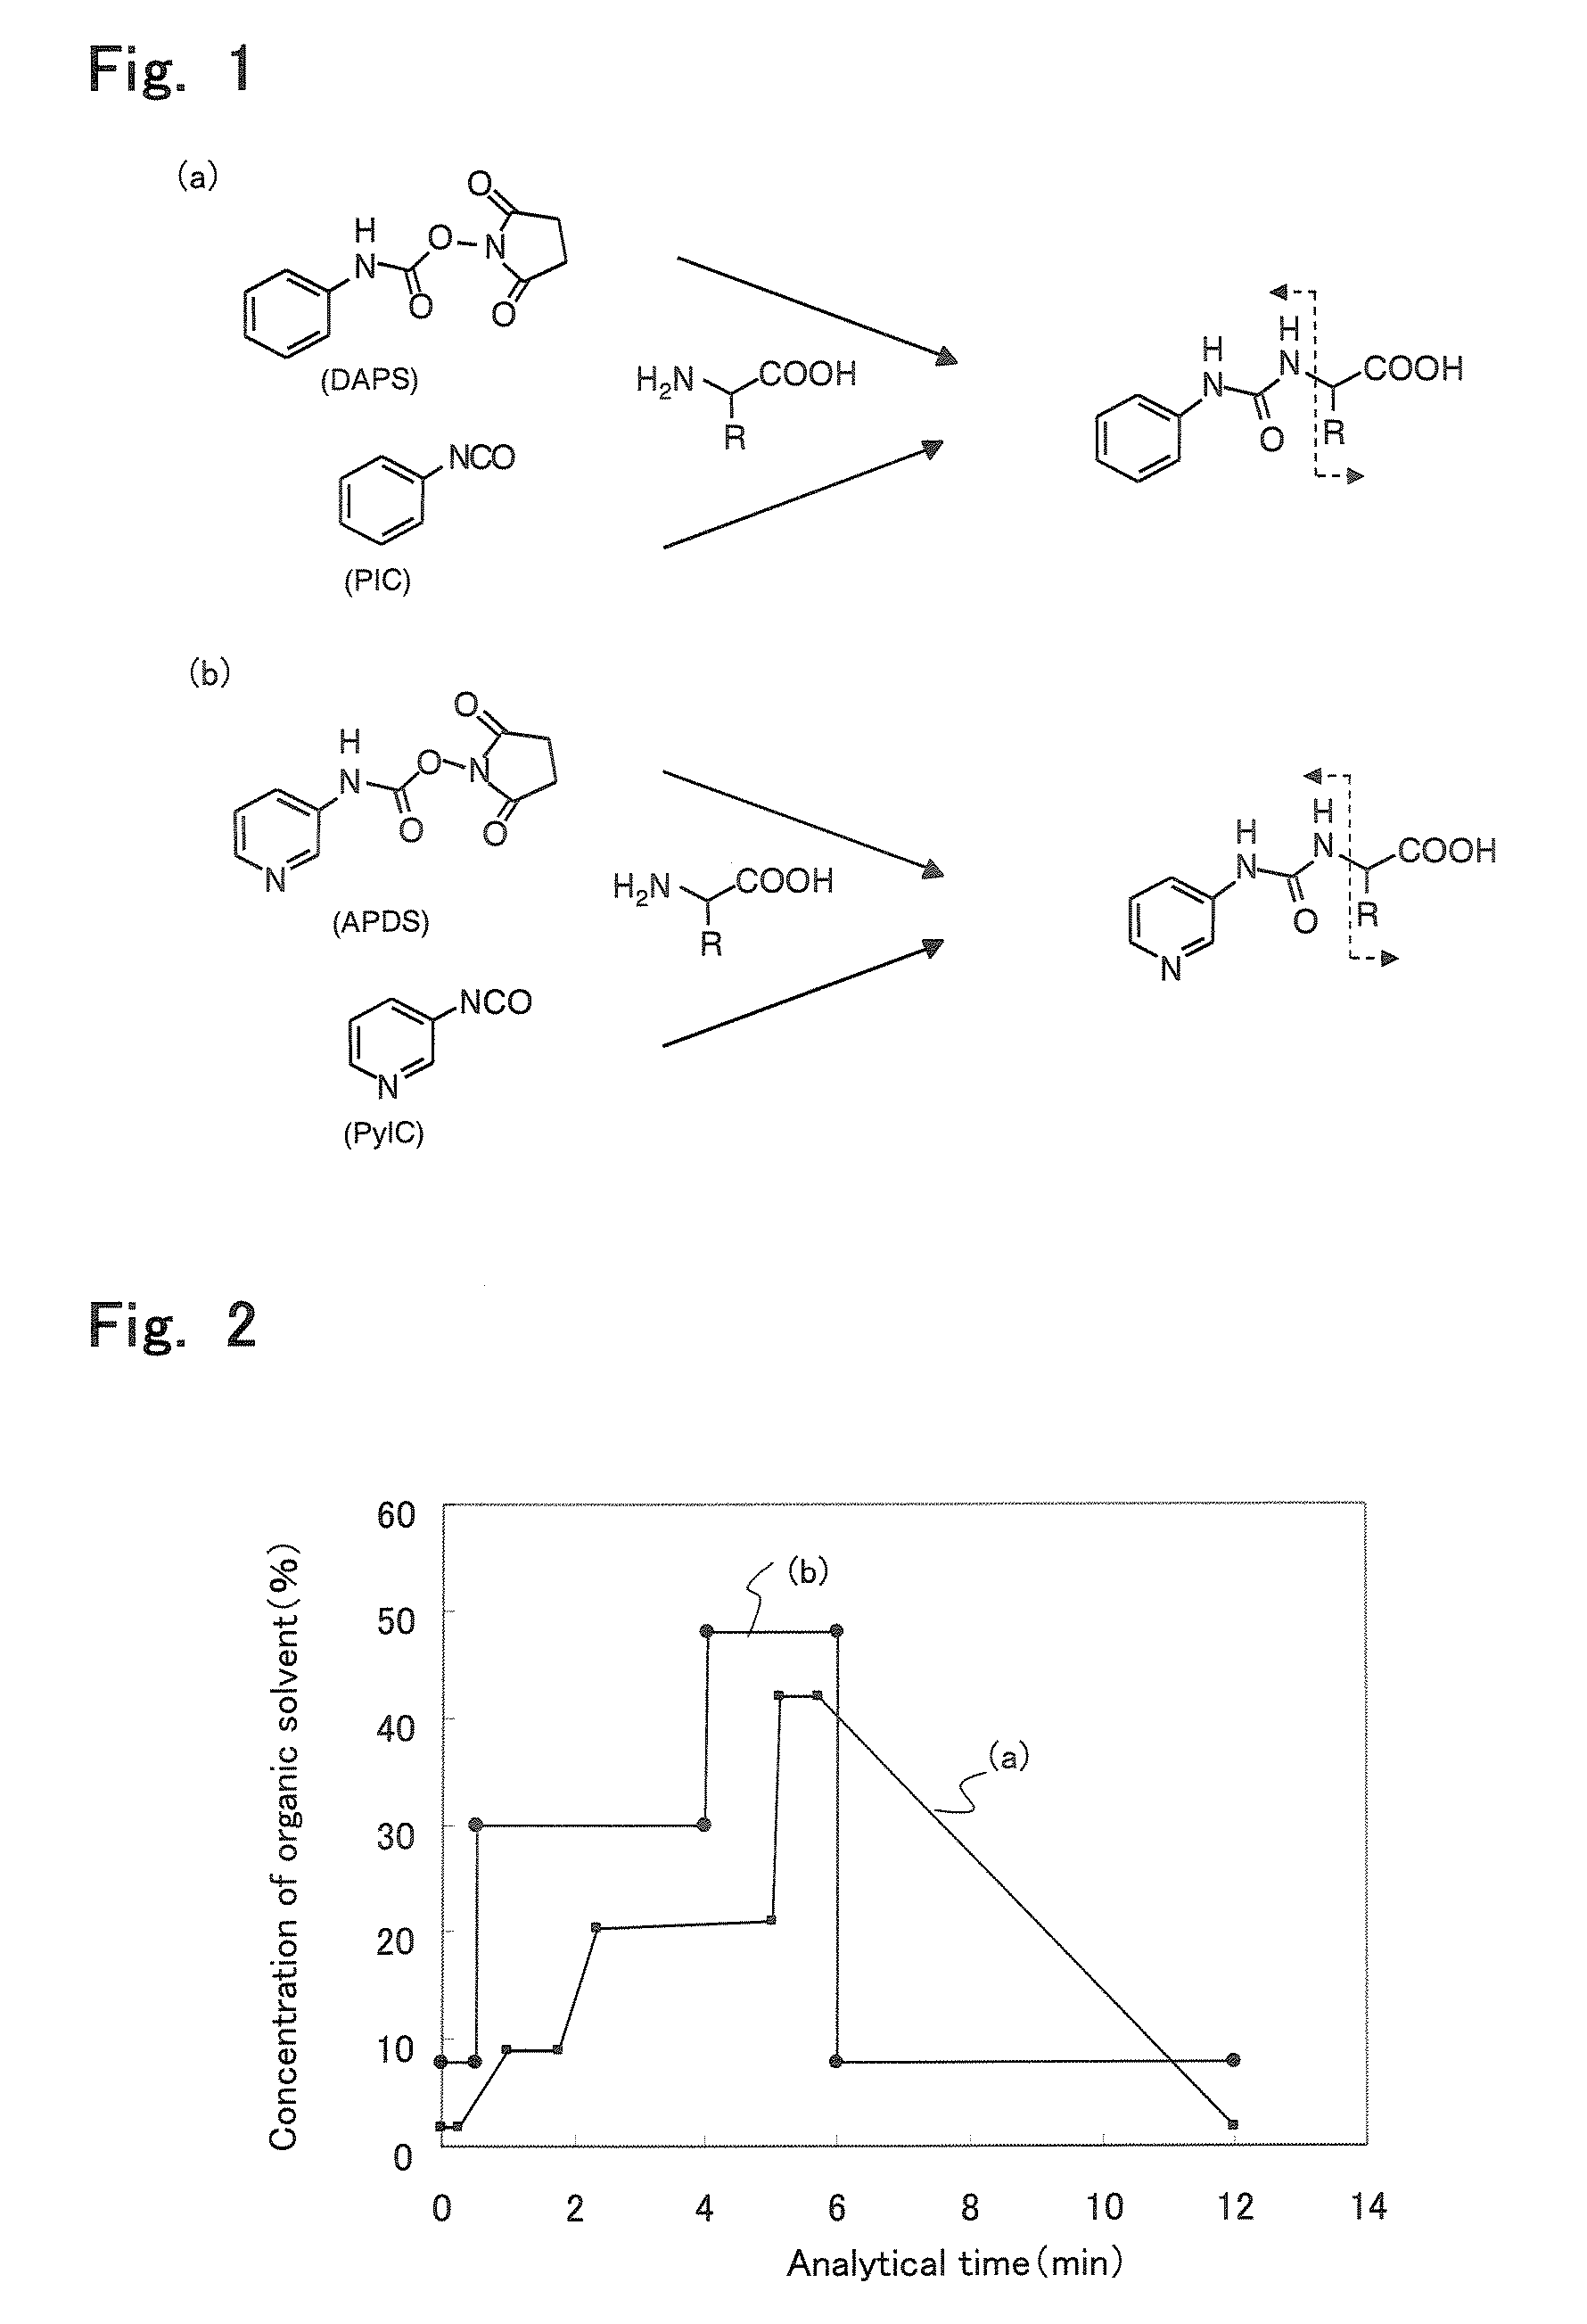 Method and apparatus for analyzing compounds with amino group